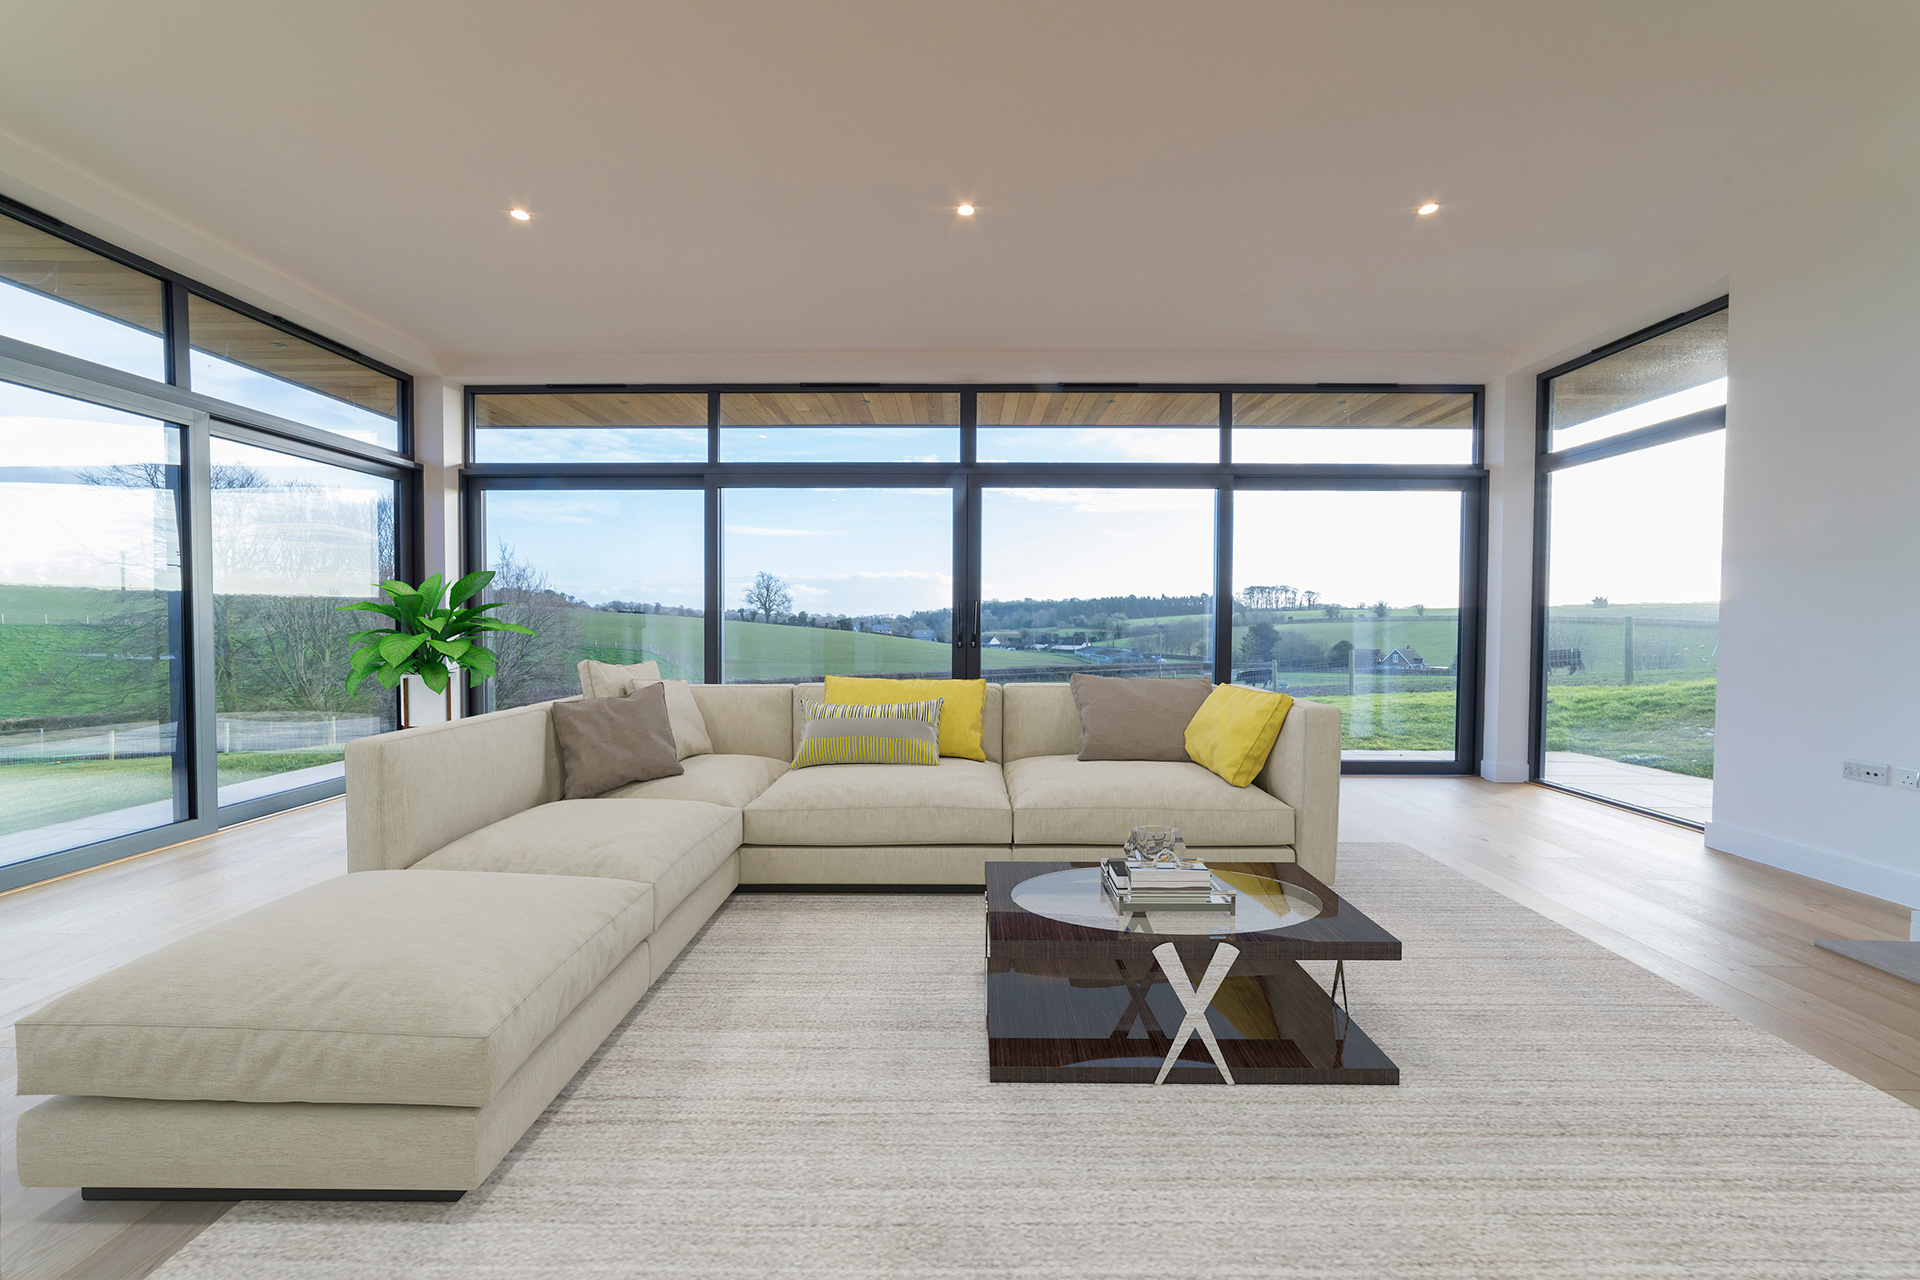 internal living area with large windows looking out to open countryside